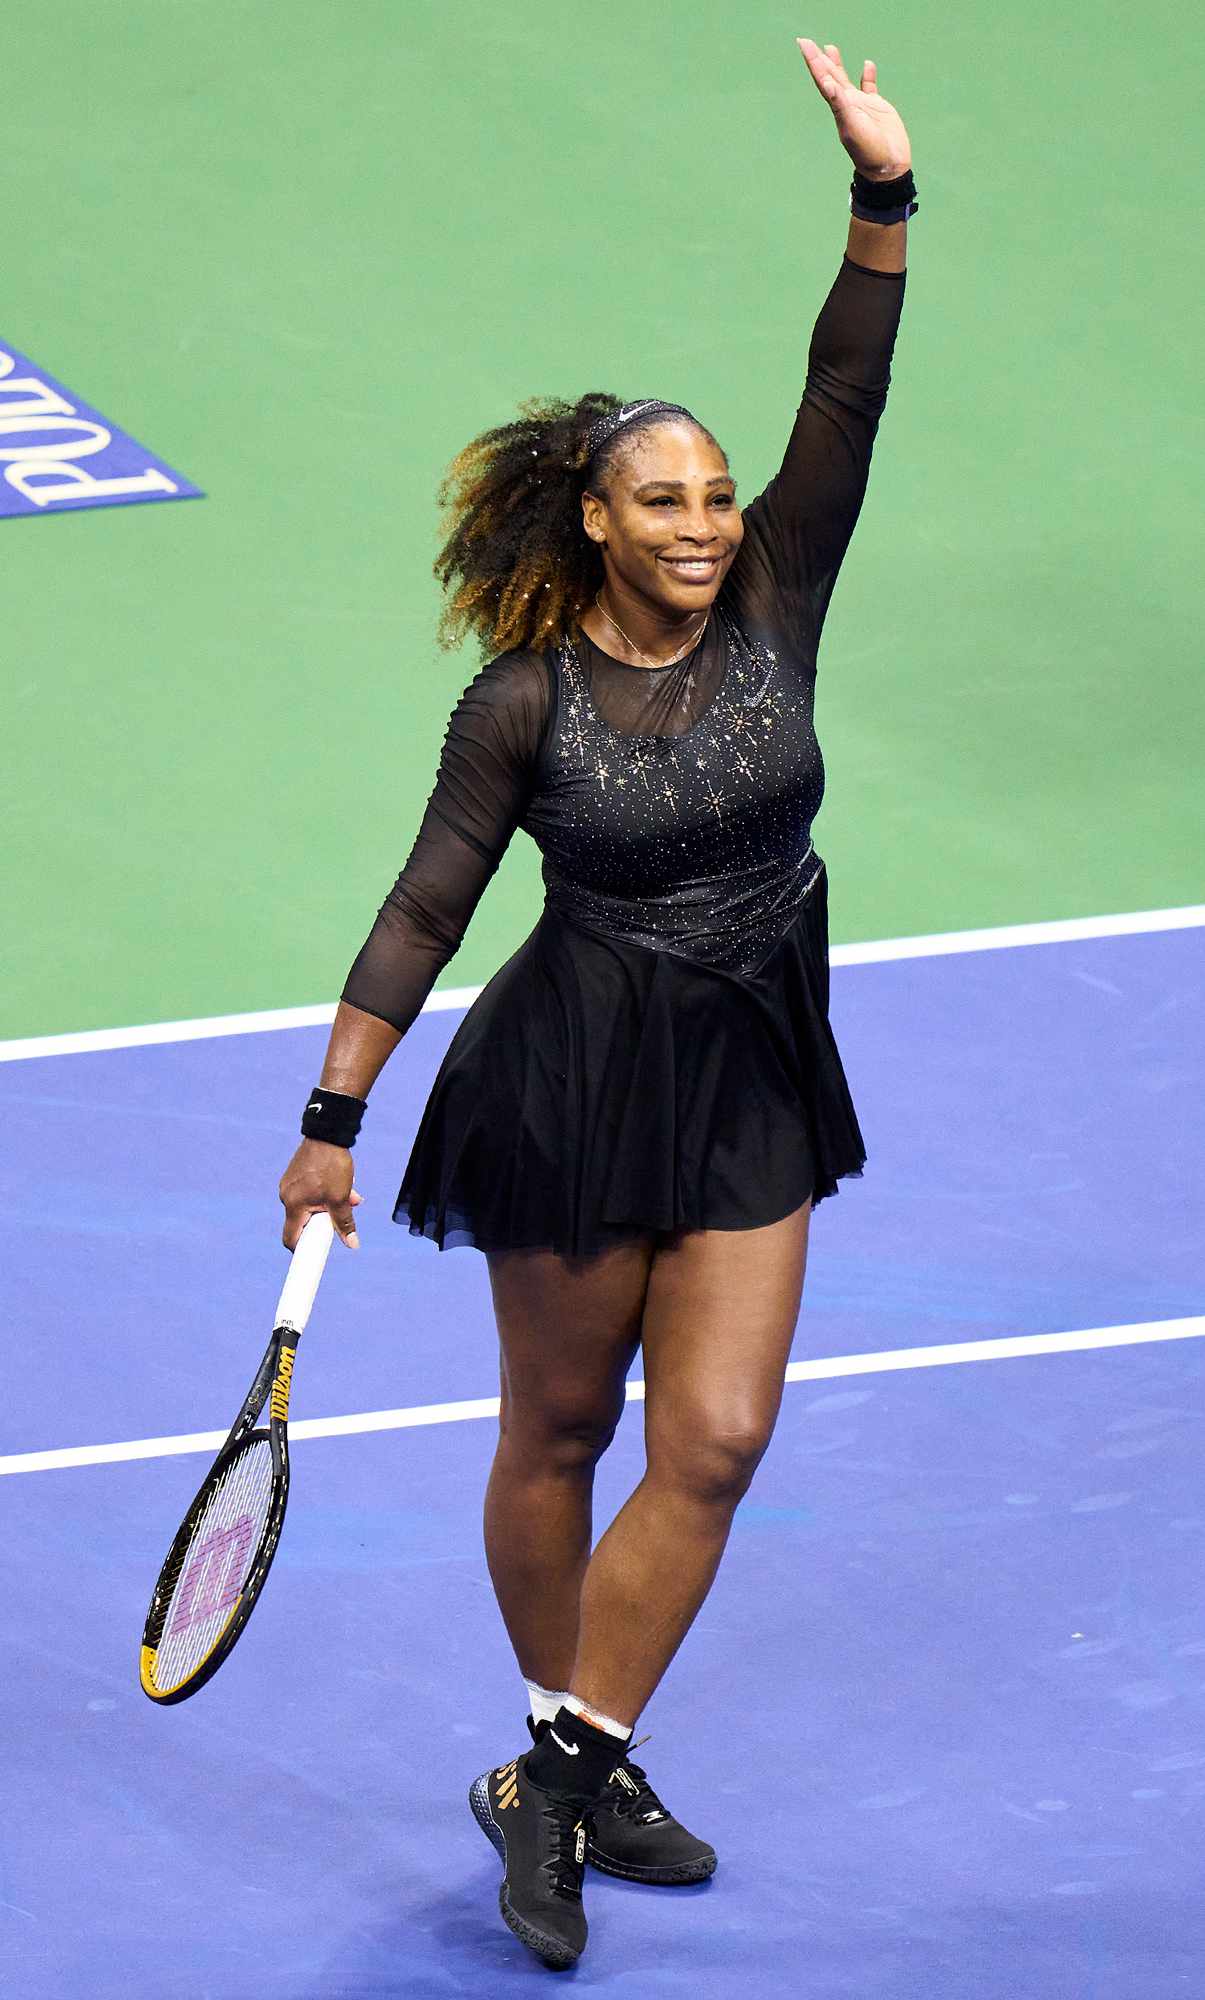 Serena Williams of the United States celebrates victory during the Women's Singles First Round match against Danka Kovinic of Montenegro on Day One of the 2022 US Open at USTA Billie Jean King National Tennis Center on August 29, 2022 in New York City